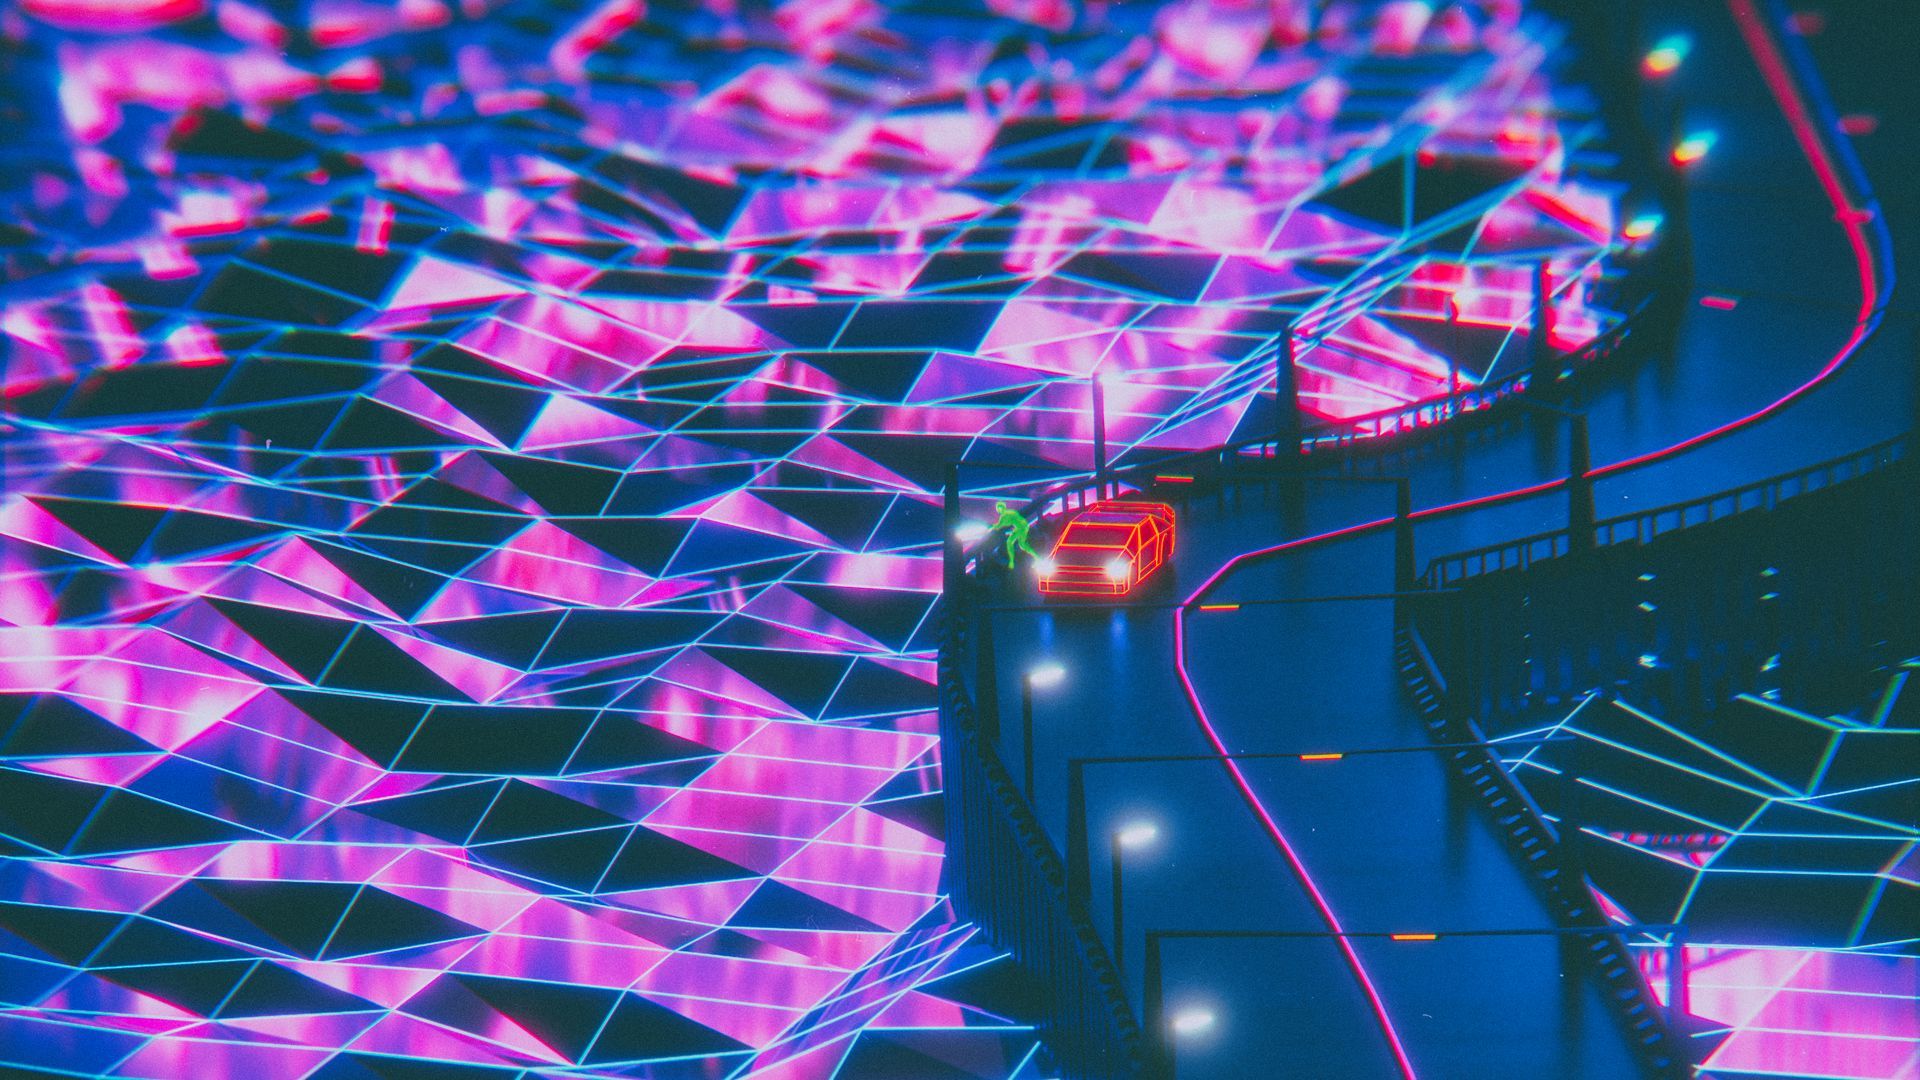 Download wallpaper 1920x1080 silhouette, road, synthwave, neon full hd, hdtv, fhd, 1080p HD background